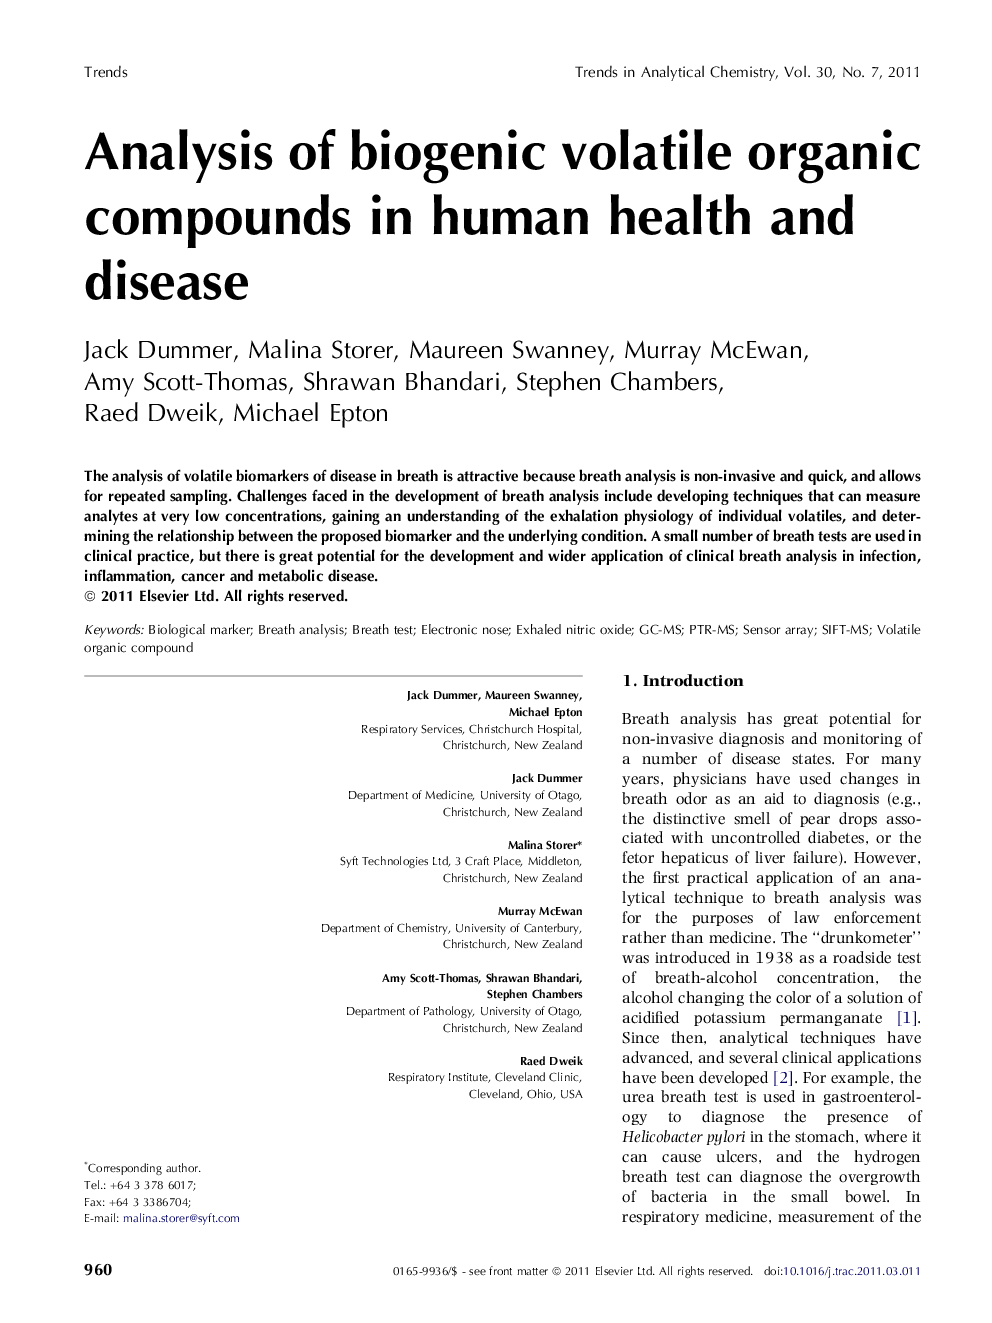 Analysis of biogenic volatile organic compounds in human health and disease